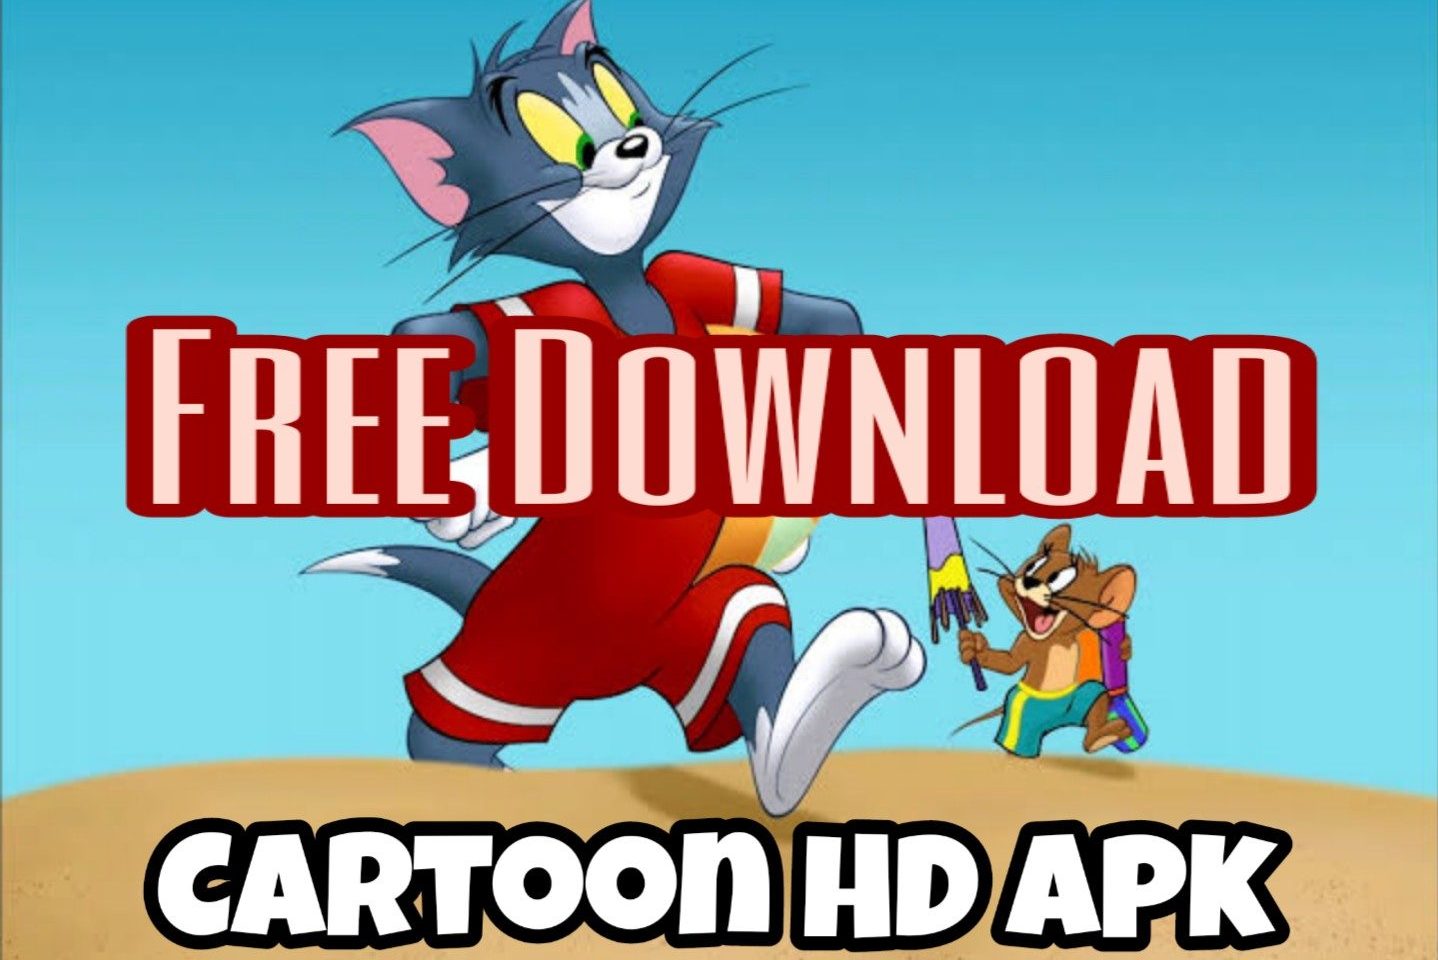 Download Cartoon HD APK v3.0.3 And Enjoy Free Movies And TV Shows